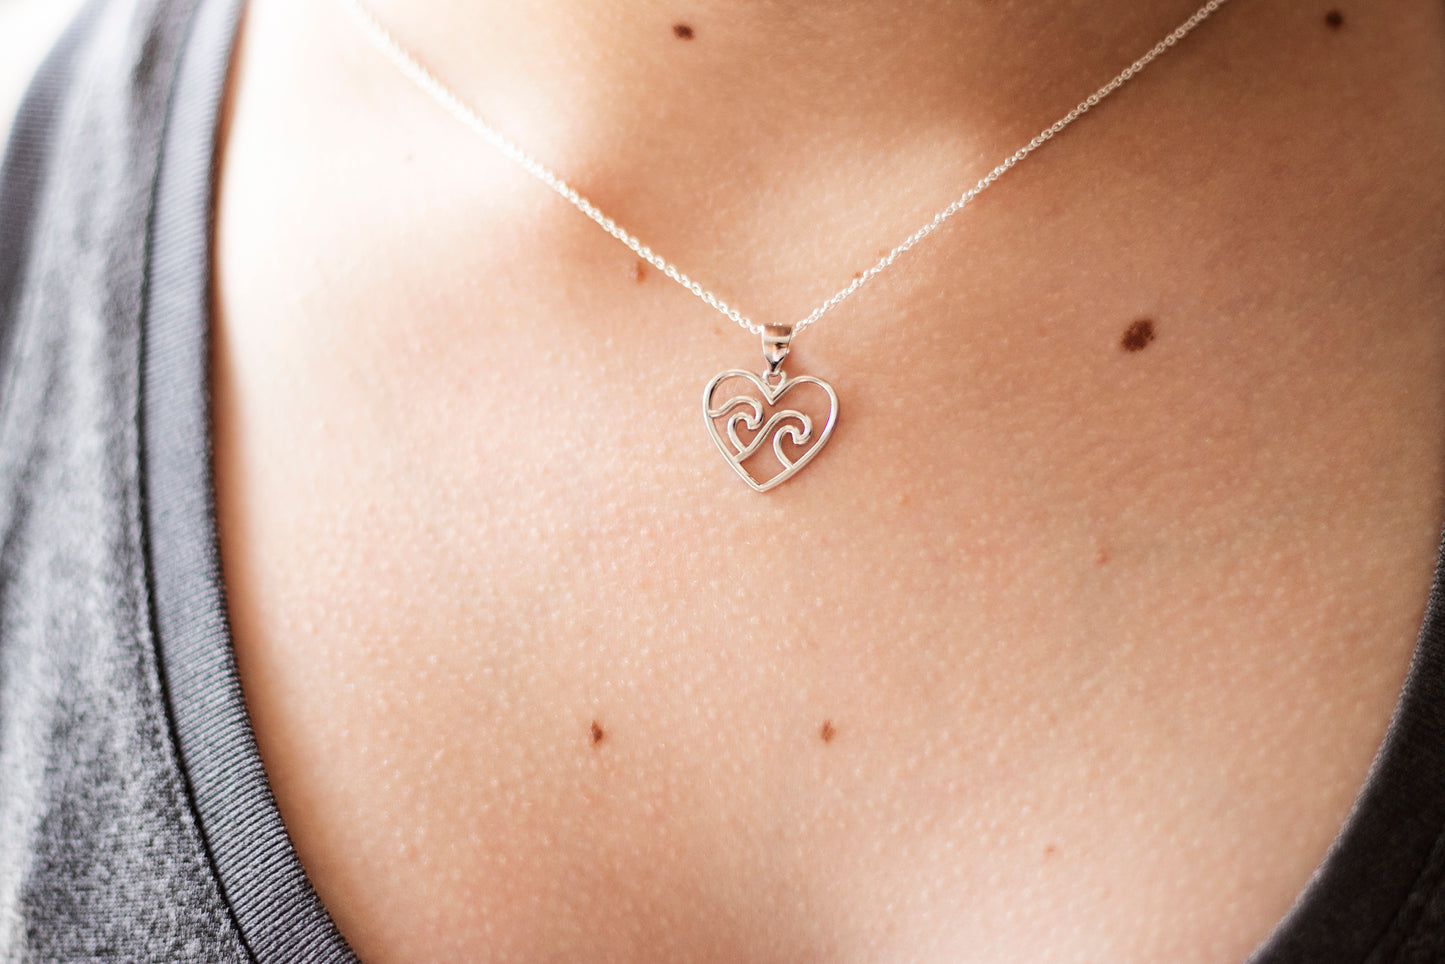 Waves in Heart Necklace